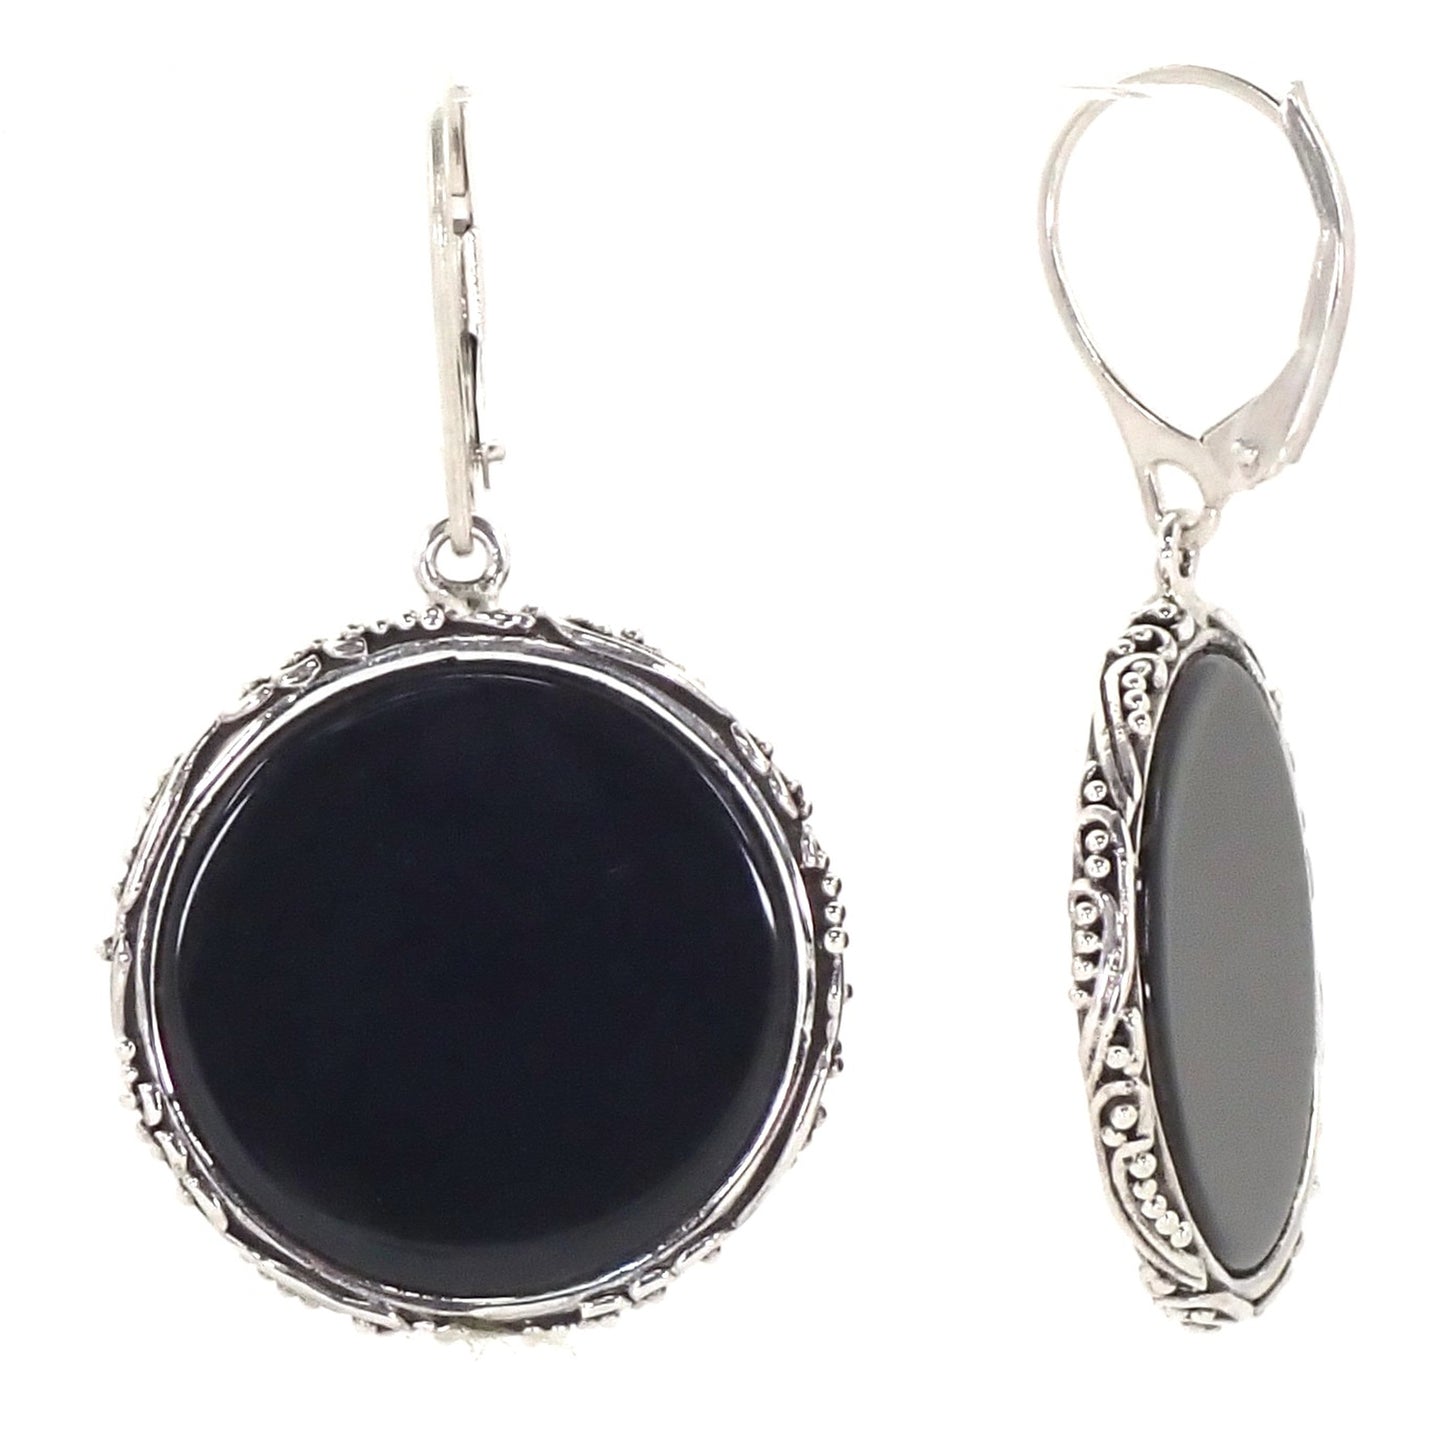 Silver filigree and bead earrings with round onyx discs.